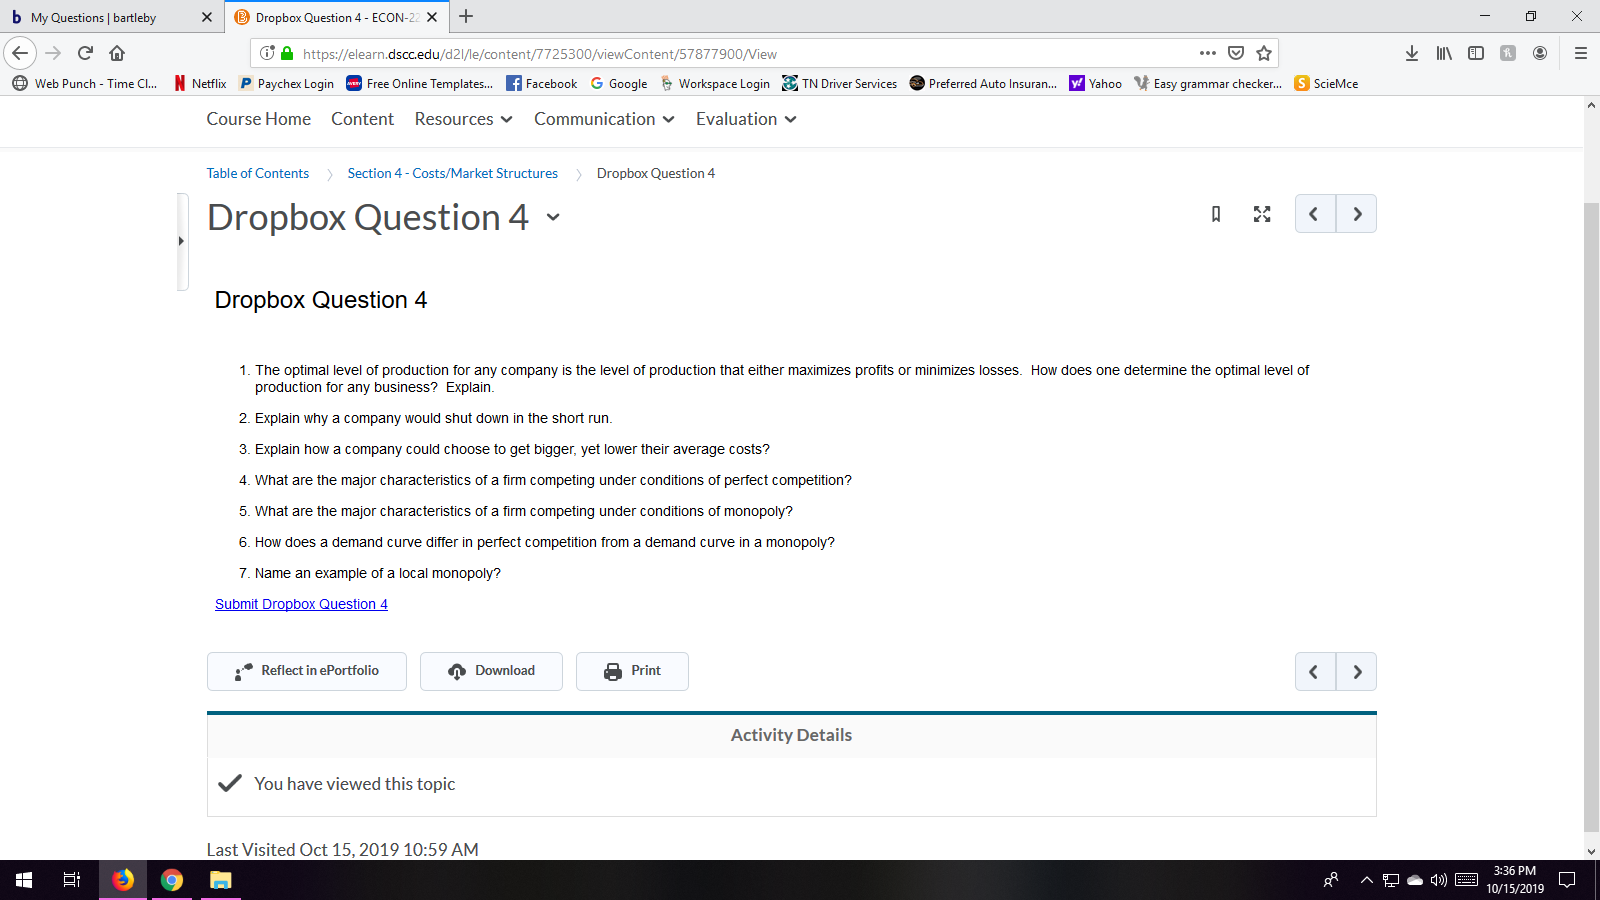 b My Questions | bartleby
Dropbox Question 4- ECON-22 x
IED
https://elearn.dscc.edu/d2l/le/content/7725300/viewContent/57877900/View
Free Online Templates... fFacebook
N Netflix P Paychex Login
Workspace LoginTN Driver Services
y Yahoo
Easy grammar checker...
G Google
Web Punch - Time Cl...
Preferred Auto Insuran...
S ScieMce
Course Home Content Resources
Communication
Evaluation
Table of Contents
Dropbox Question 4
Section 4-Costs/Market Structures
Dropbox Question 4
A
<
Dropbox Question 4
1. The optimal level of production for any company is the level of production that either maximizes profits or minimizes losses. How does one determine the optimal level of
production for any business? Explain
2. Explain why a company would shut down in the short run.
3. Explain how a company could choose to get bigger, yet lower their average costs?
4. What are the major characteristics of a firm competing under conditions of perfect competition?
5. What are the major characteristics of a firm competing under conditions of monopoly?
6. How does a demand curve differ in perfect competition from a demand curve in a monopoly?
7. Name an example of a local monopoly?
Submit Dropbox Question 4
Reflect in ePortfolio
Download
Print
<
Activity Details
You have viewed this topic
Last Visited Oct 15, 2019 10:59 AM
3:36 PM
^
10/15/2019
